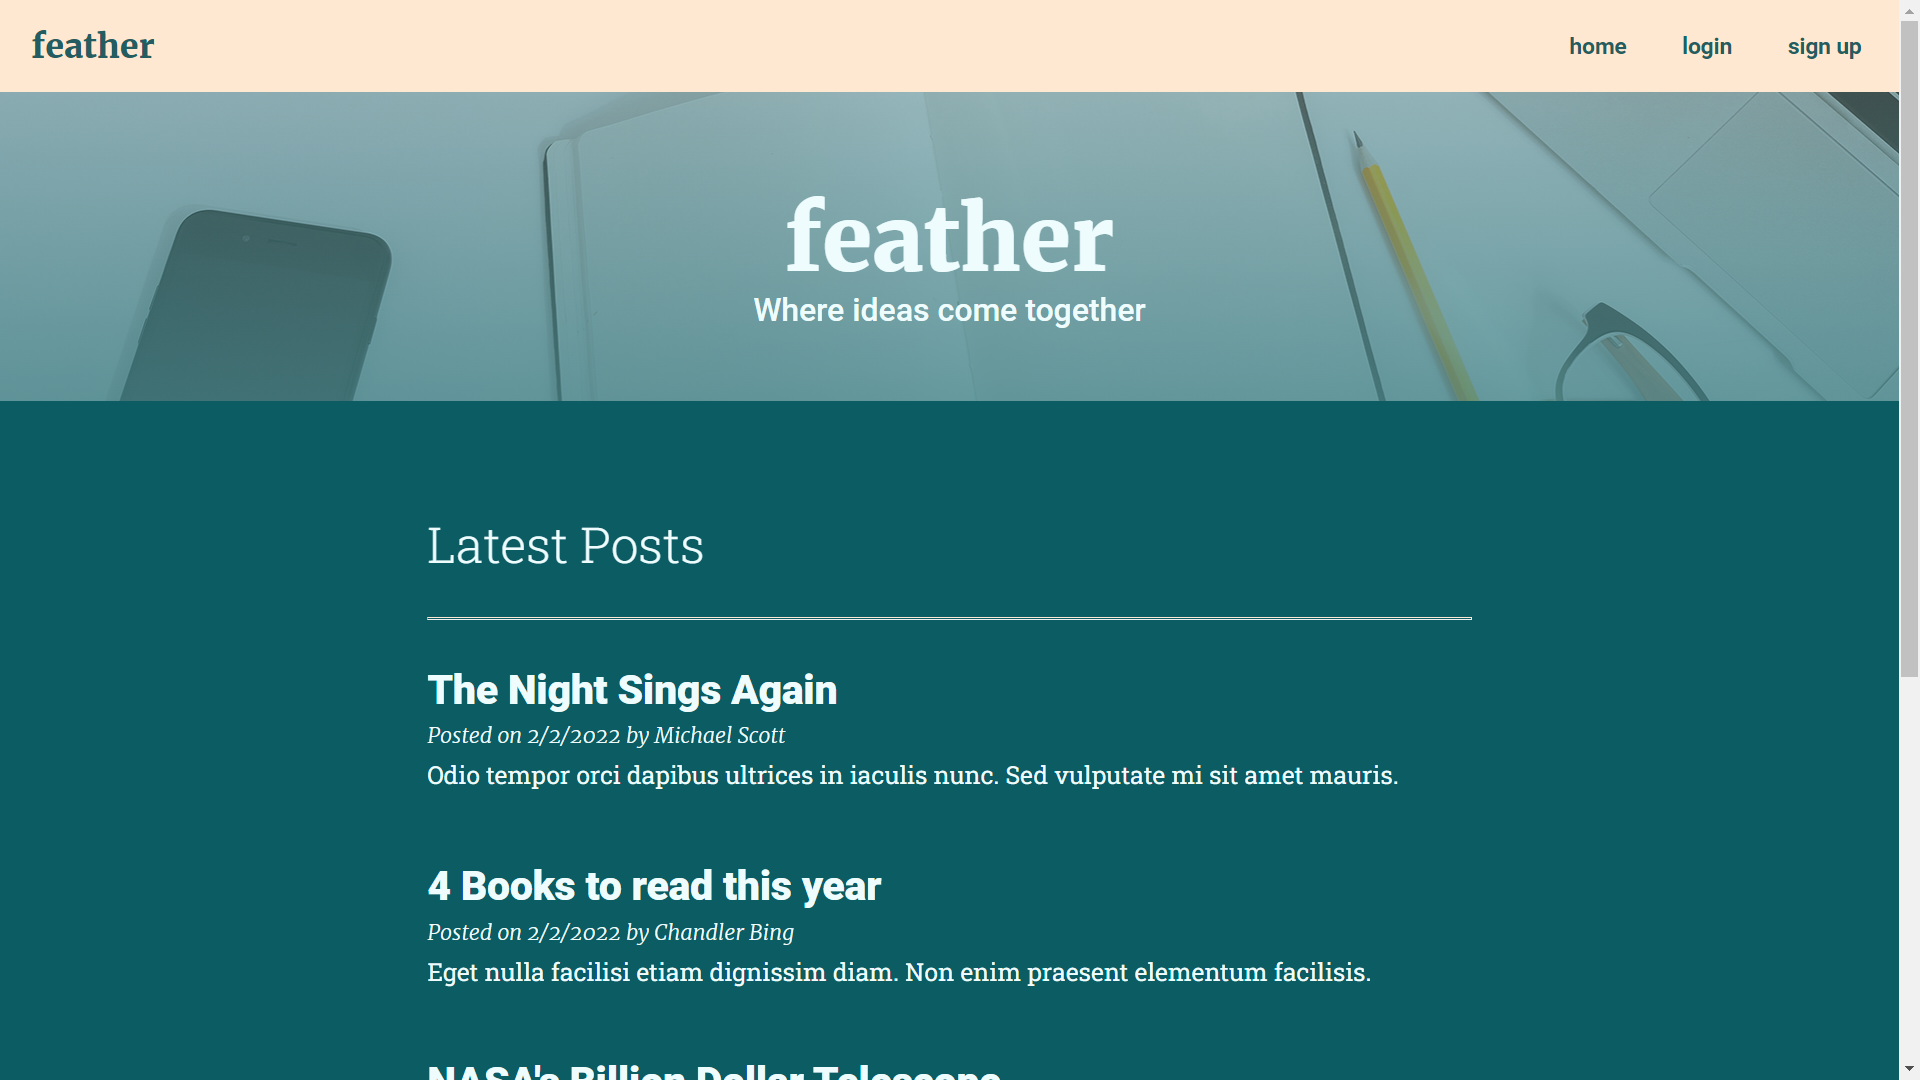 Feather Landing Page